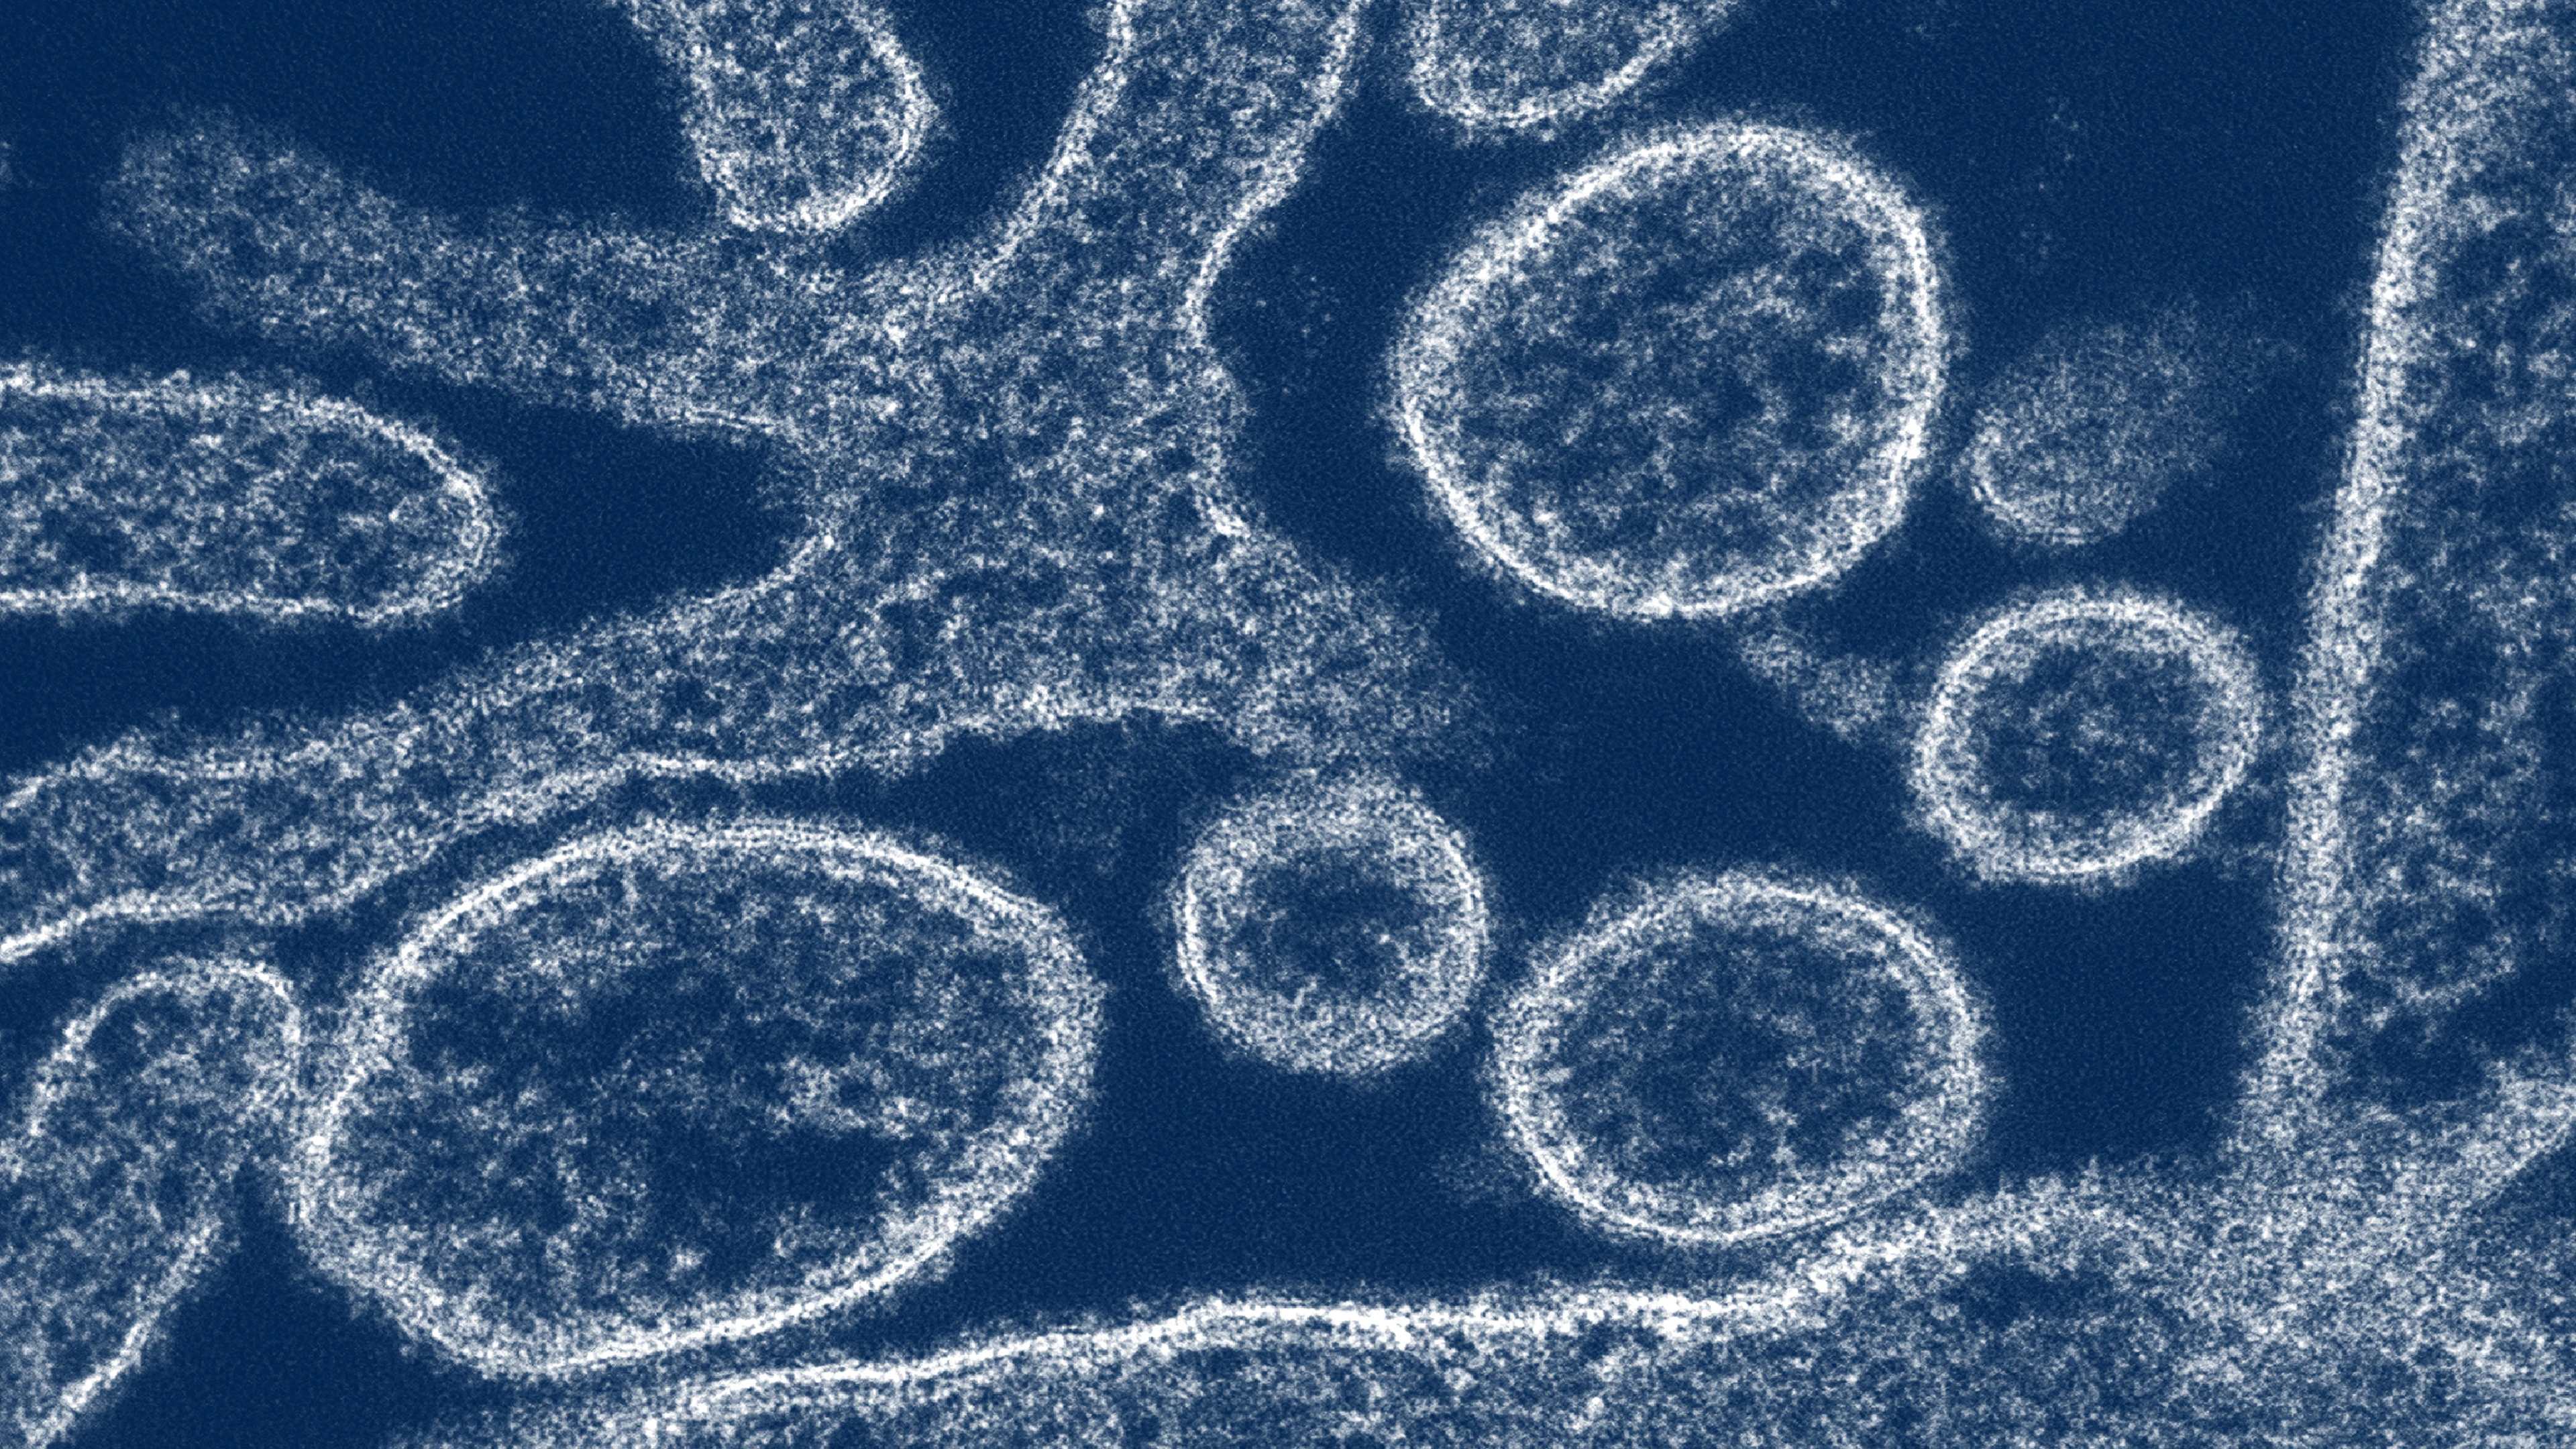 Colourised transmission electron micrograph of Nipah Virus particles